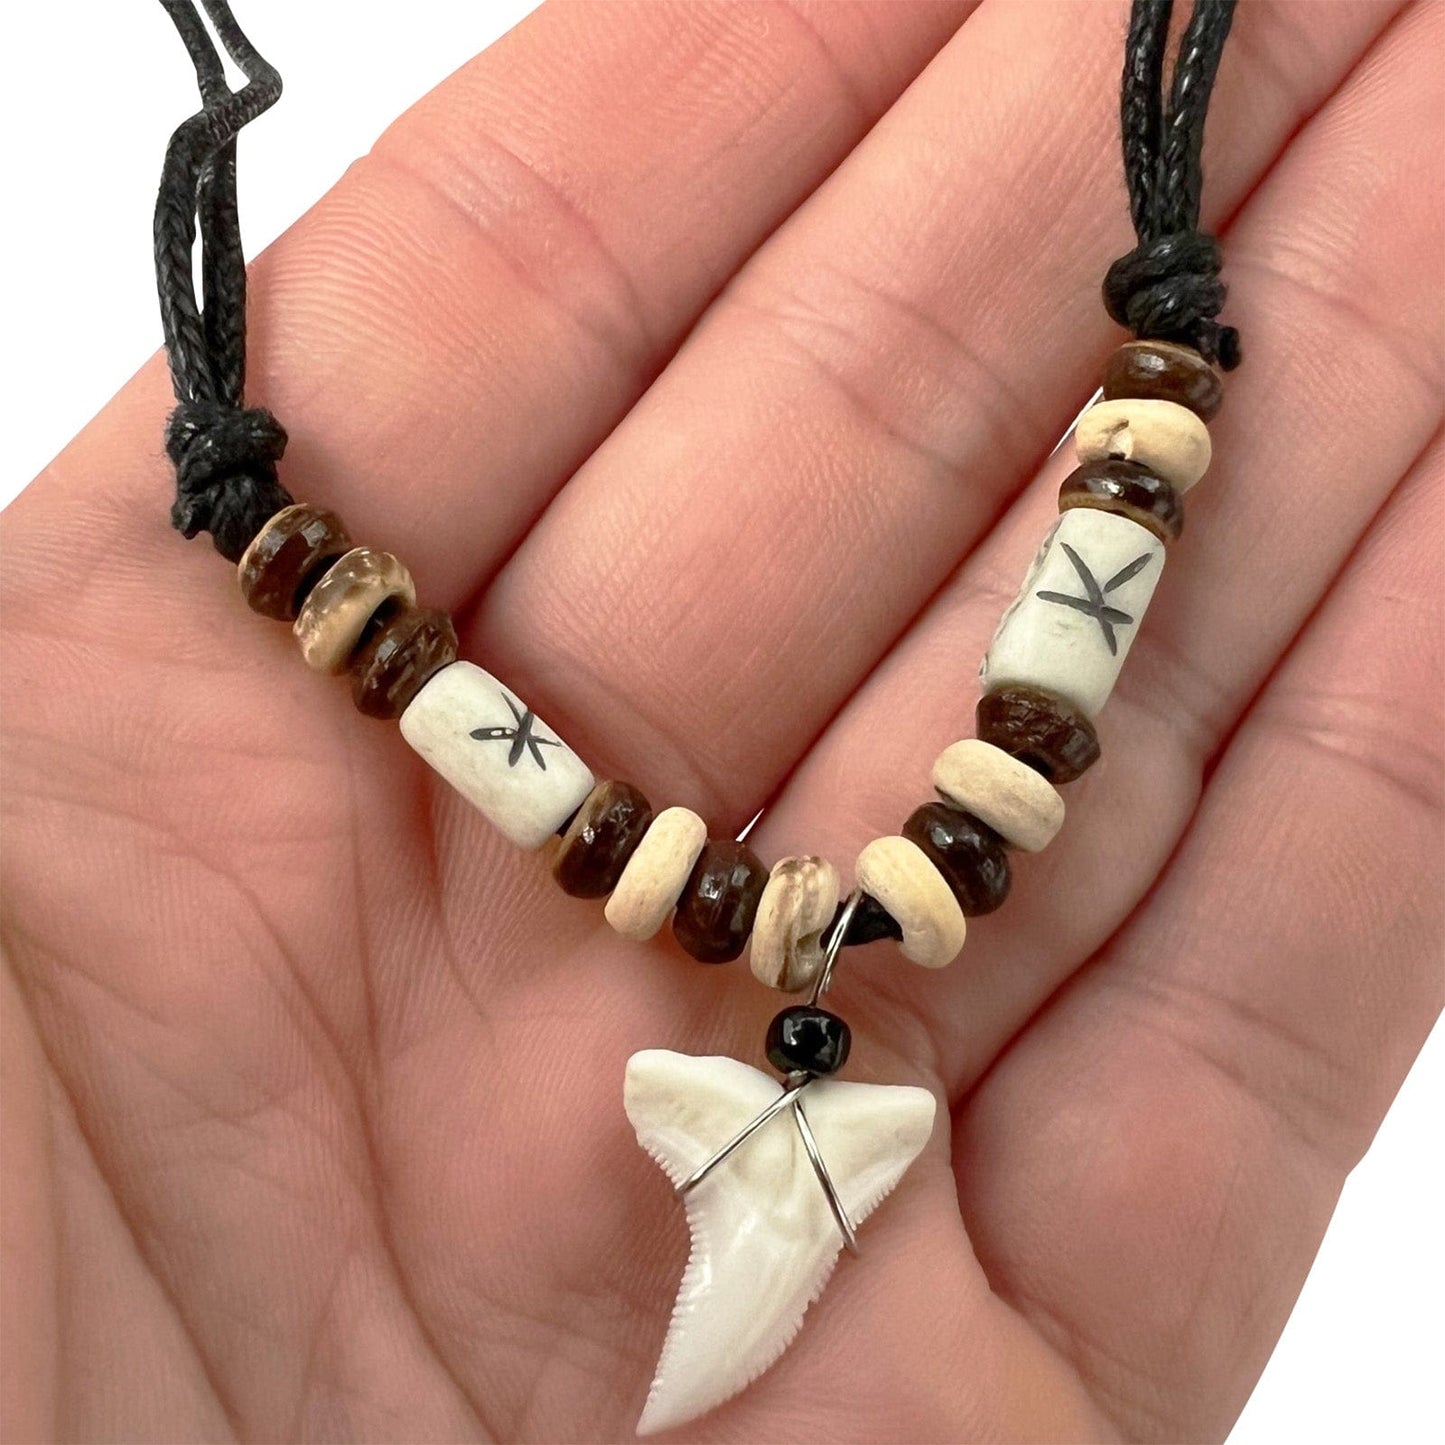 Imitation Resin Shark Tooth Pendant Necklace Wooden Beads Chain Mens Womens Guys Kids Jewellery